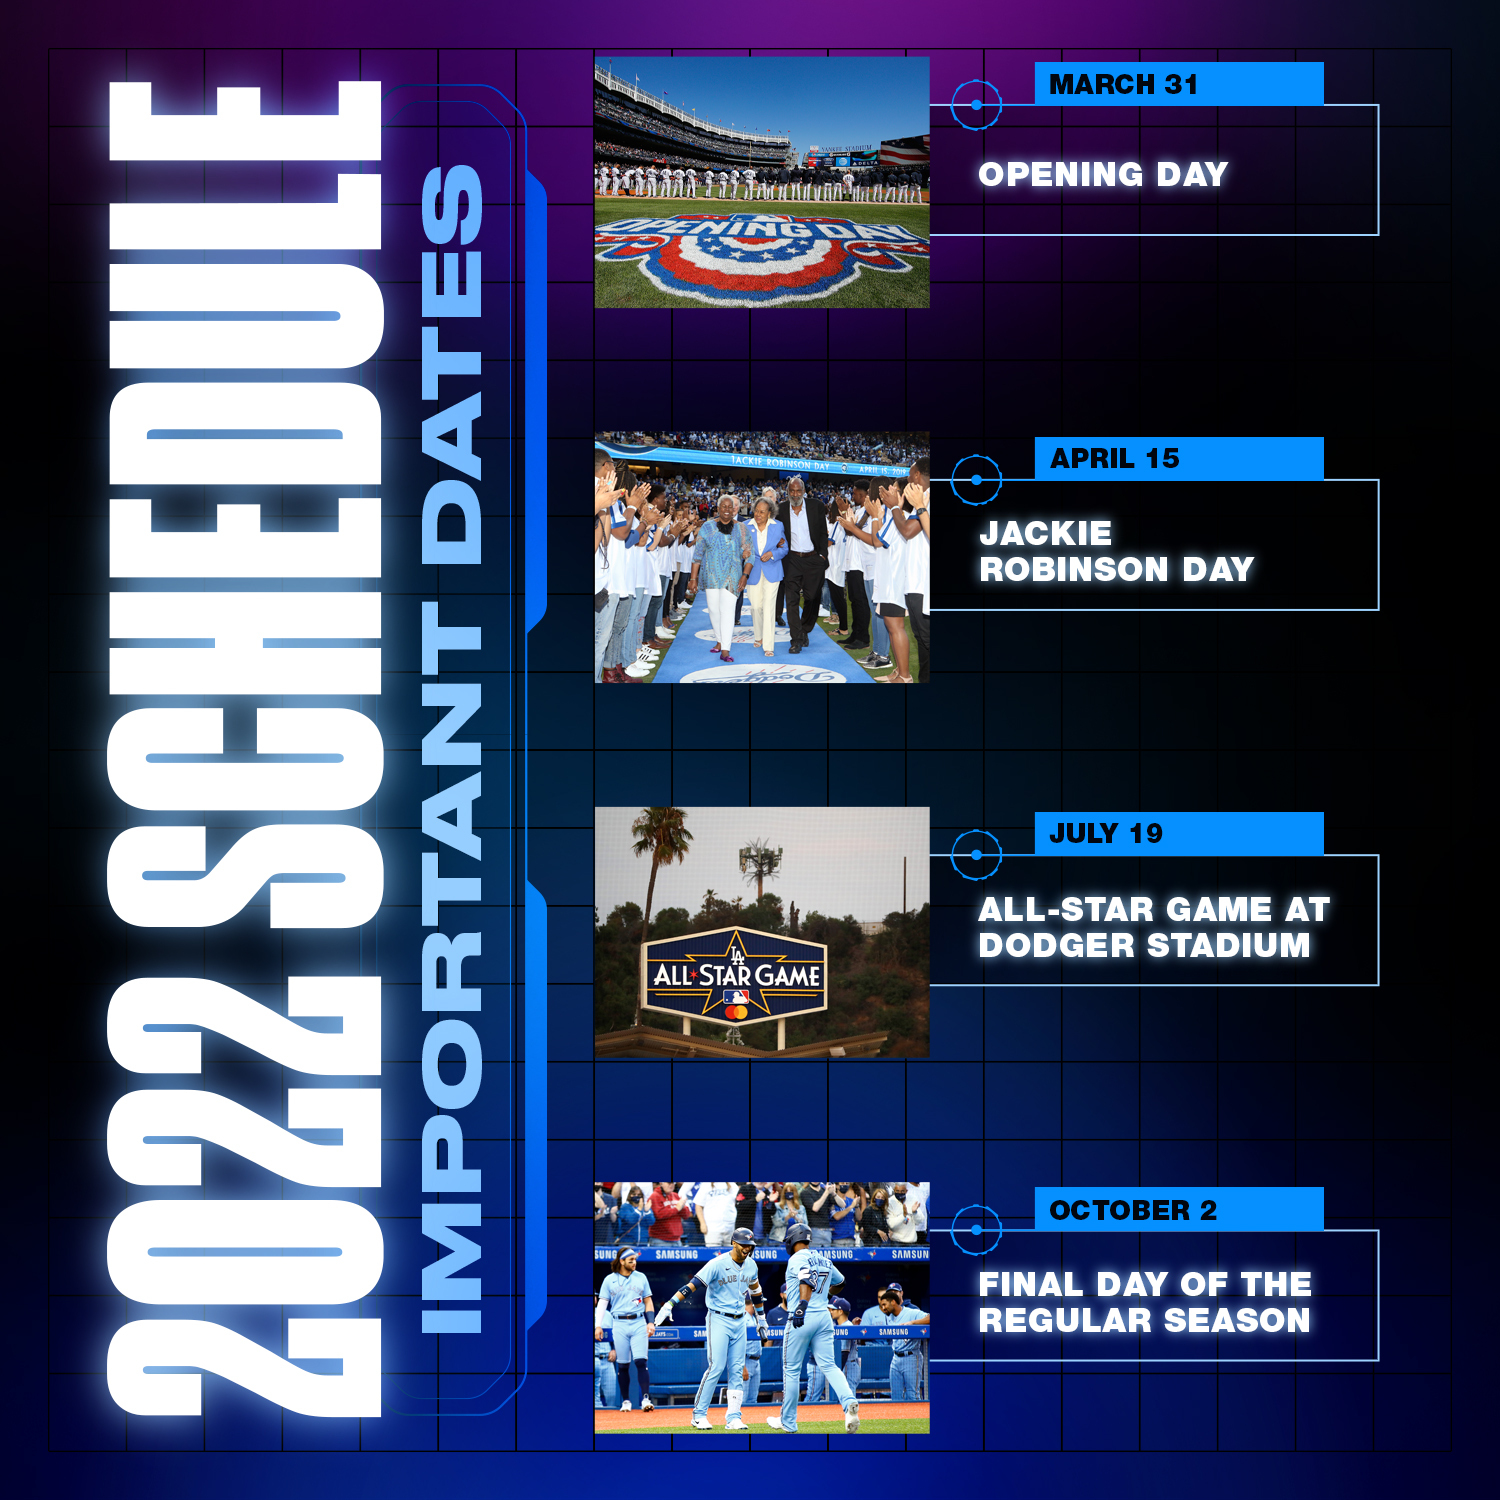 Mlb Schedule August 2022 Mlb On Twitter: "The 2022 Schedule Is Out! Mark Your Calendar Accordingly.  ⬇️ Https://T.co/By19Zgwwbu" / Twitter